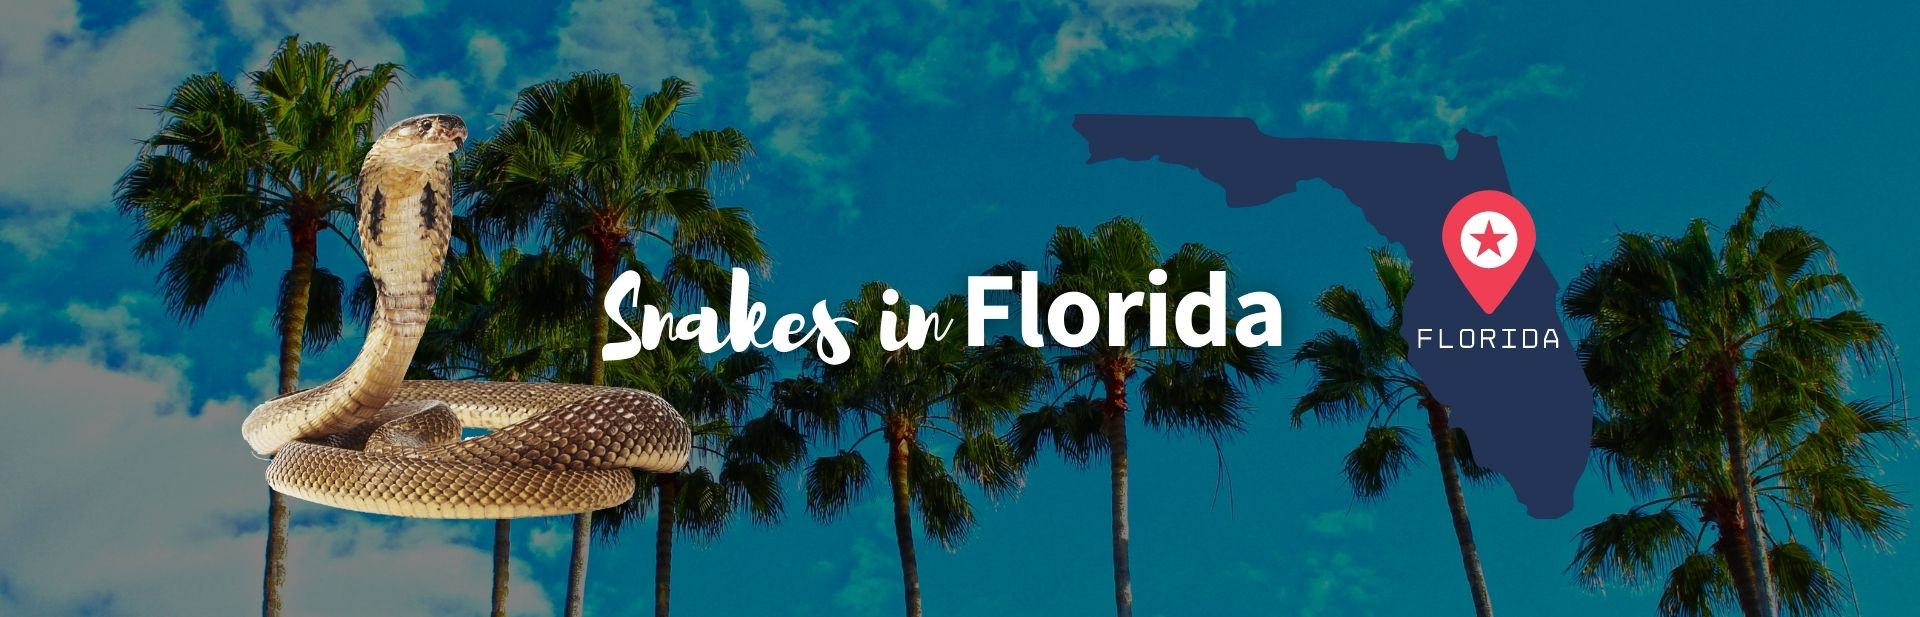 50+ Snakes In Florida: ID Guide with Facts, Photos, Chart and more